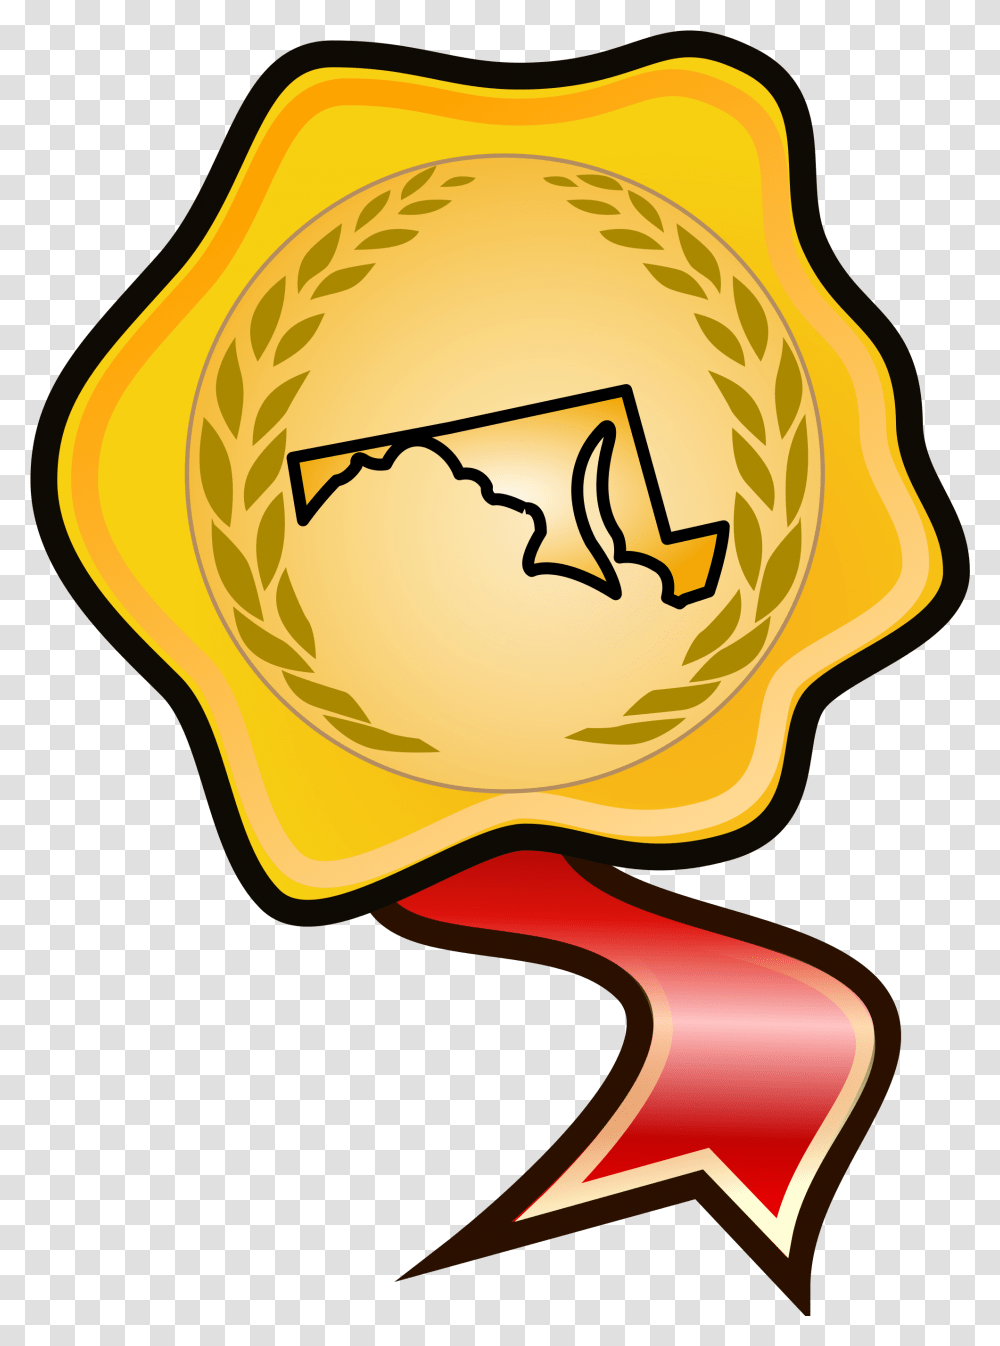 File Md Gold Medal Svg Wikimedia Commons Portable Network Graphics, Label, Food, Outdoors Transparent Png